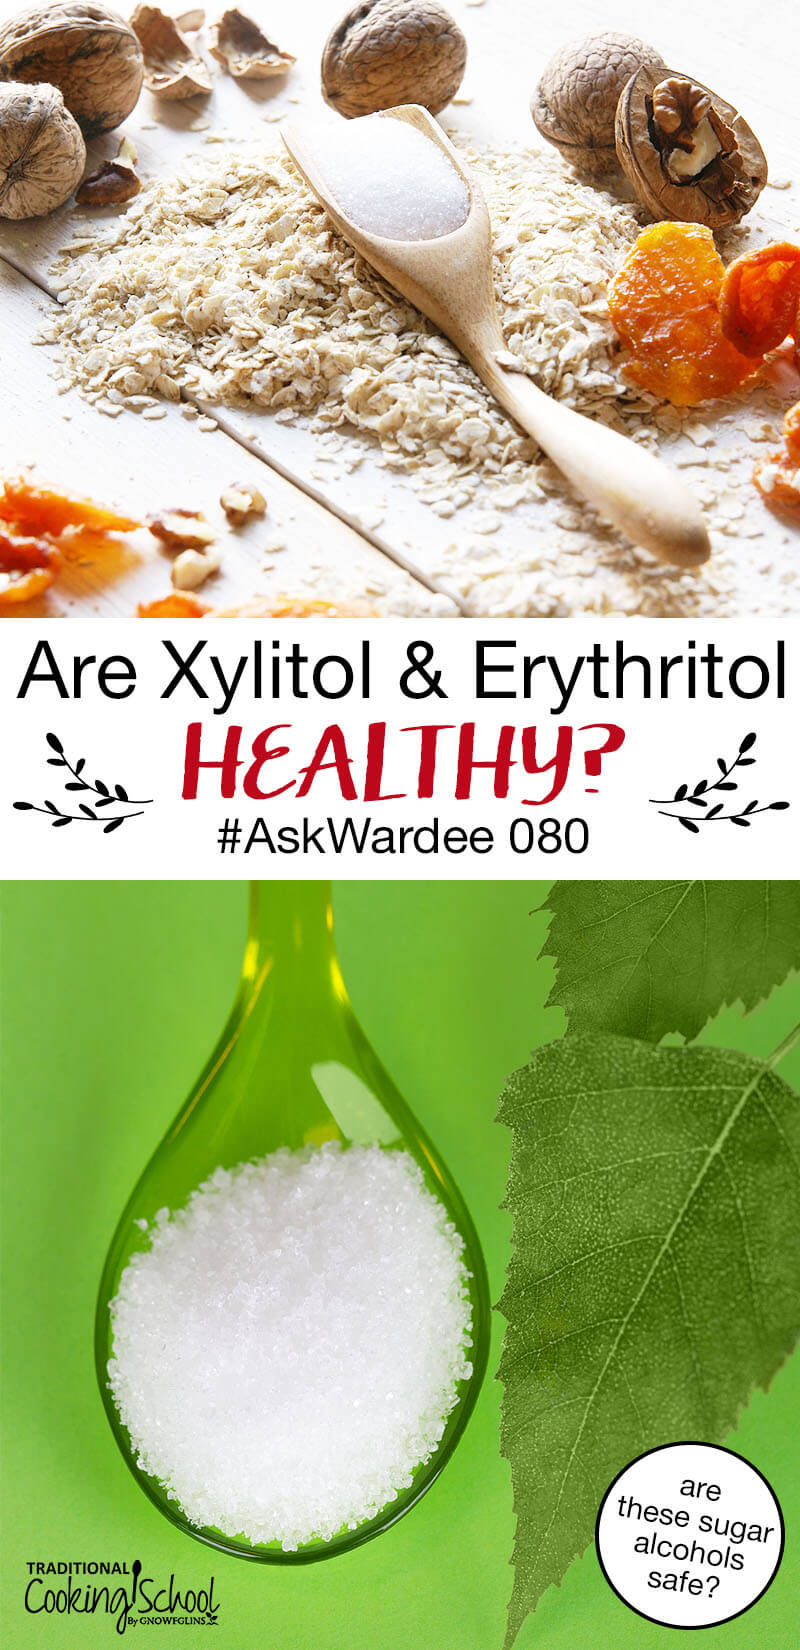 Pinterest pin with two images. The top image of a wooden spoon filled with Xylitol laying on a table next to walnuts and dried fruit. The second image is a glass spoon filled with Erythritol next to a green leaf. Text overlay says, "Are Xylitol & Erythritol Healthy? #AskWardee 080 - are these sugar alcohols safe?"